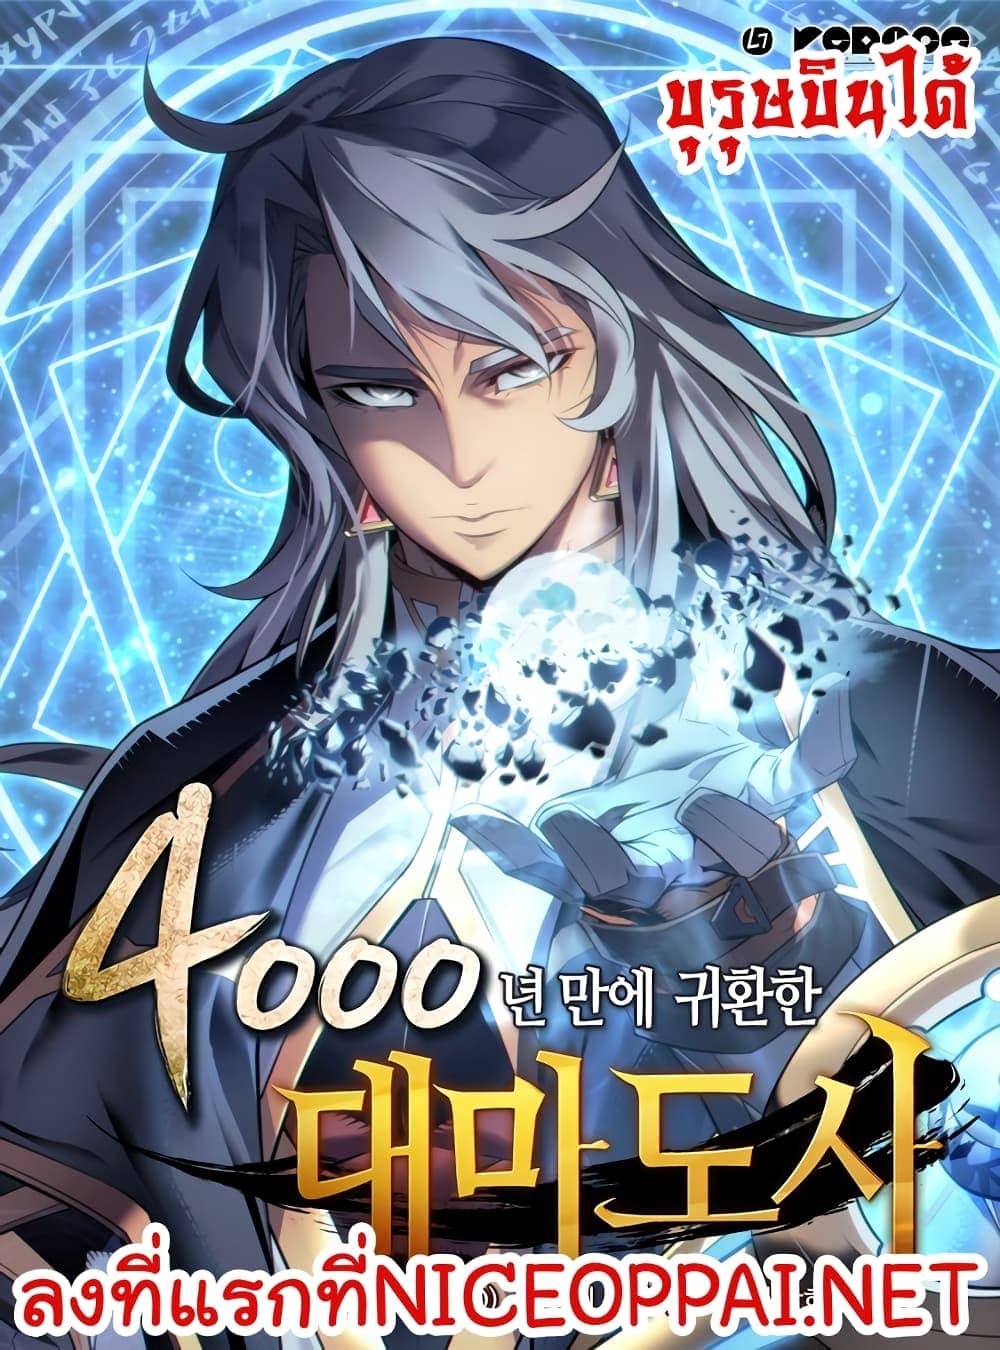 The Great Mage Returns After 4000 Years 31 (1)